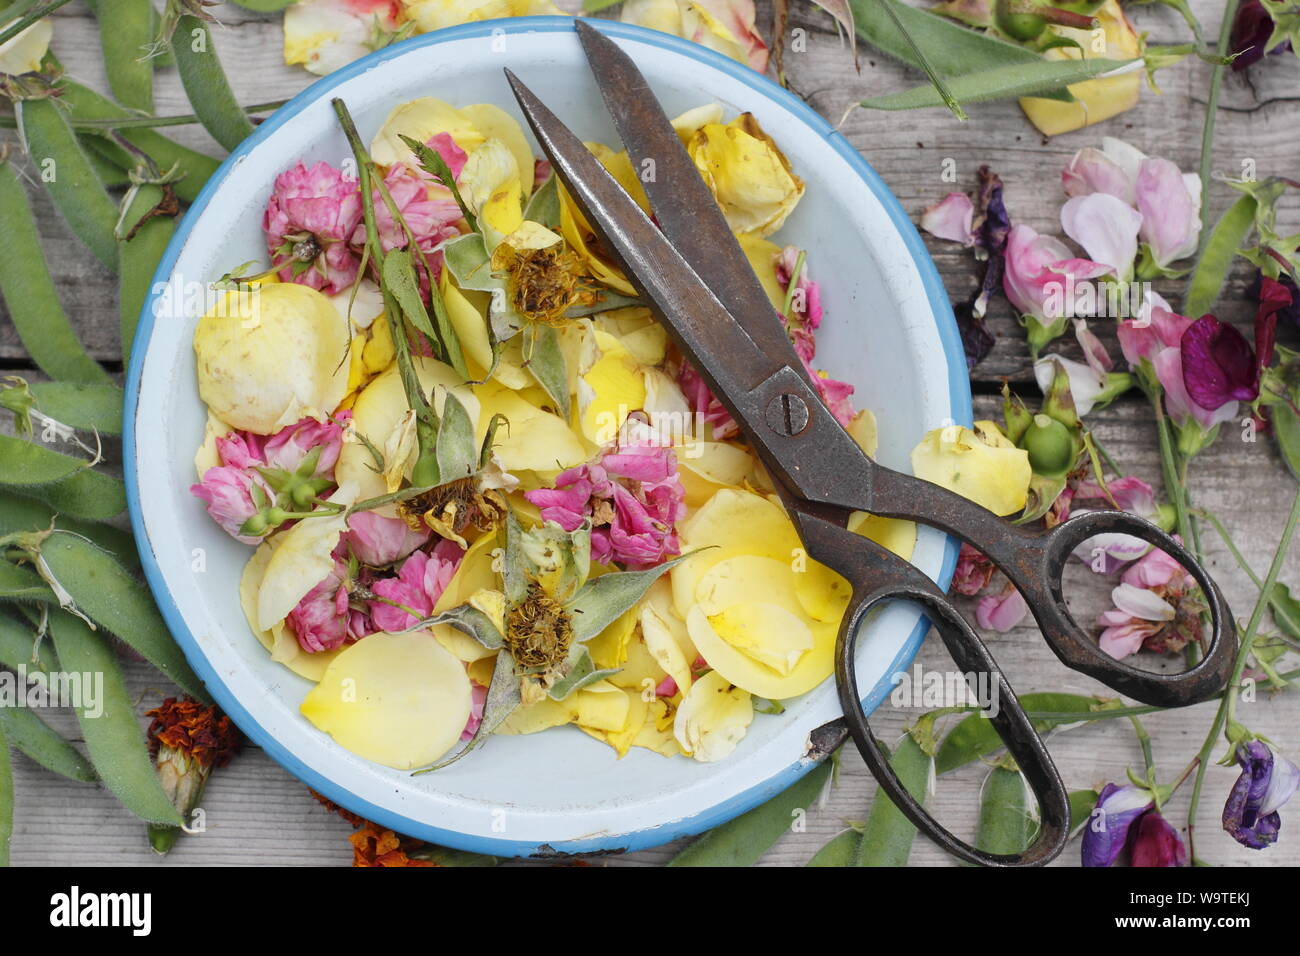 Flower deadheads - roses, marigolds and sweet peas - in blue plate on outdoor wooden table in a summer garden. UK Stock Photo